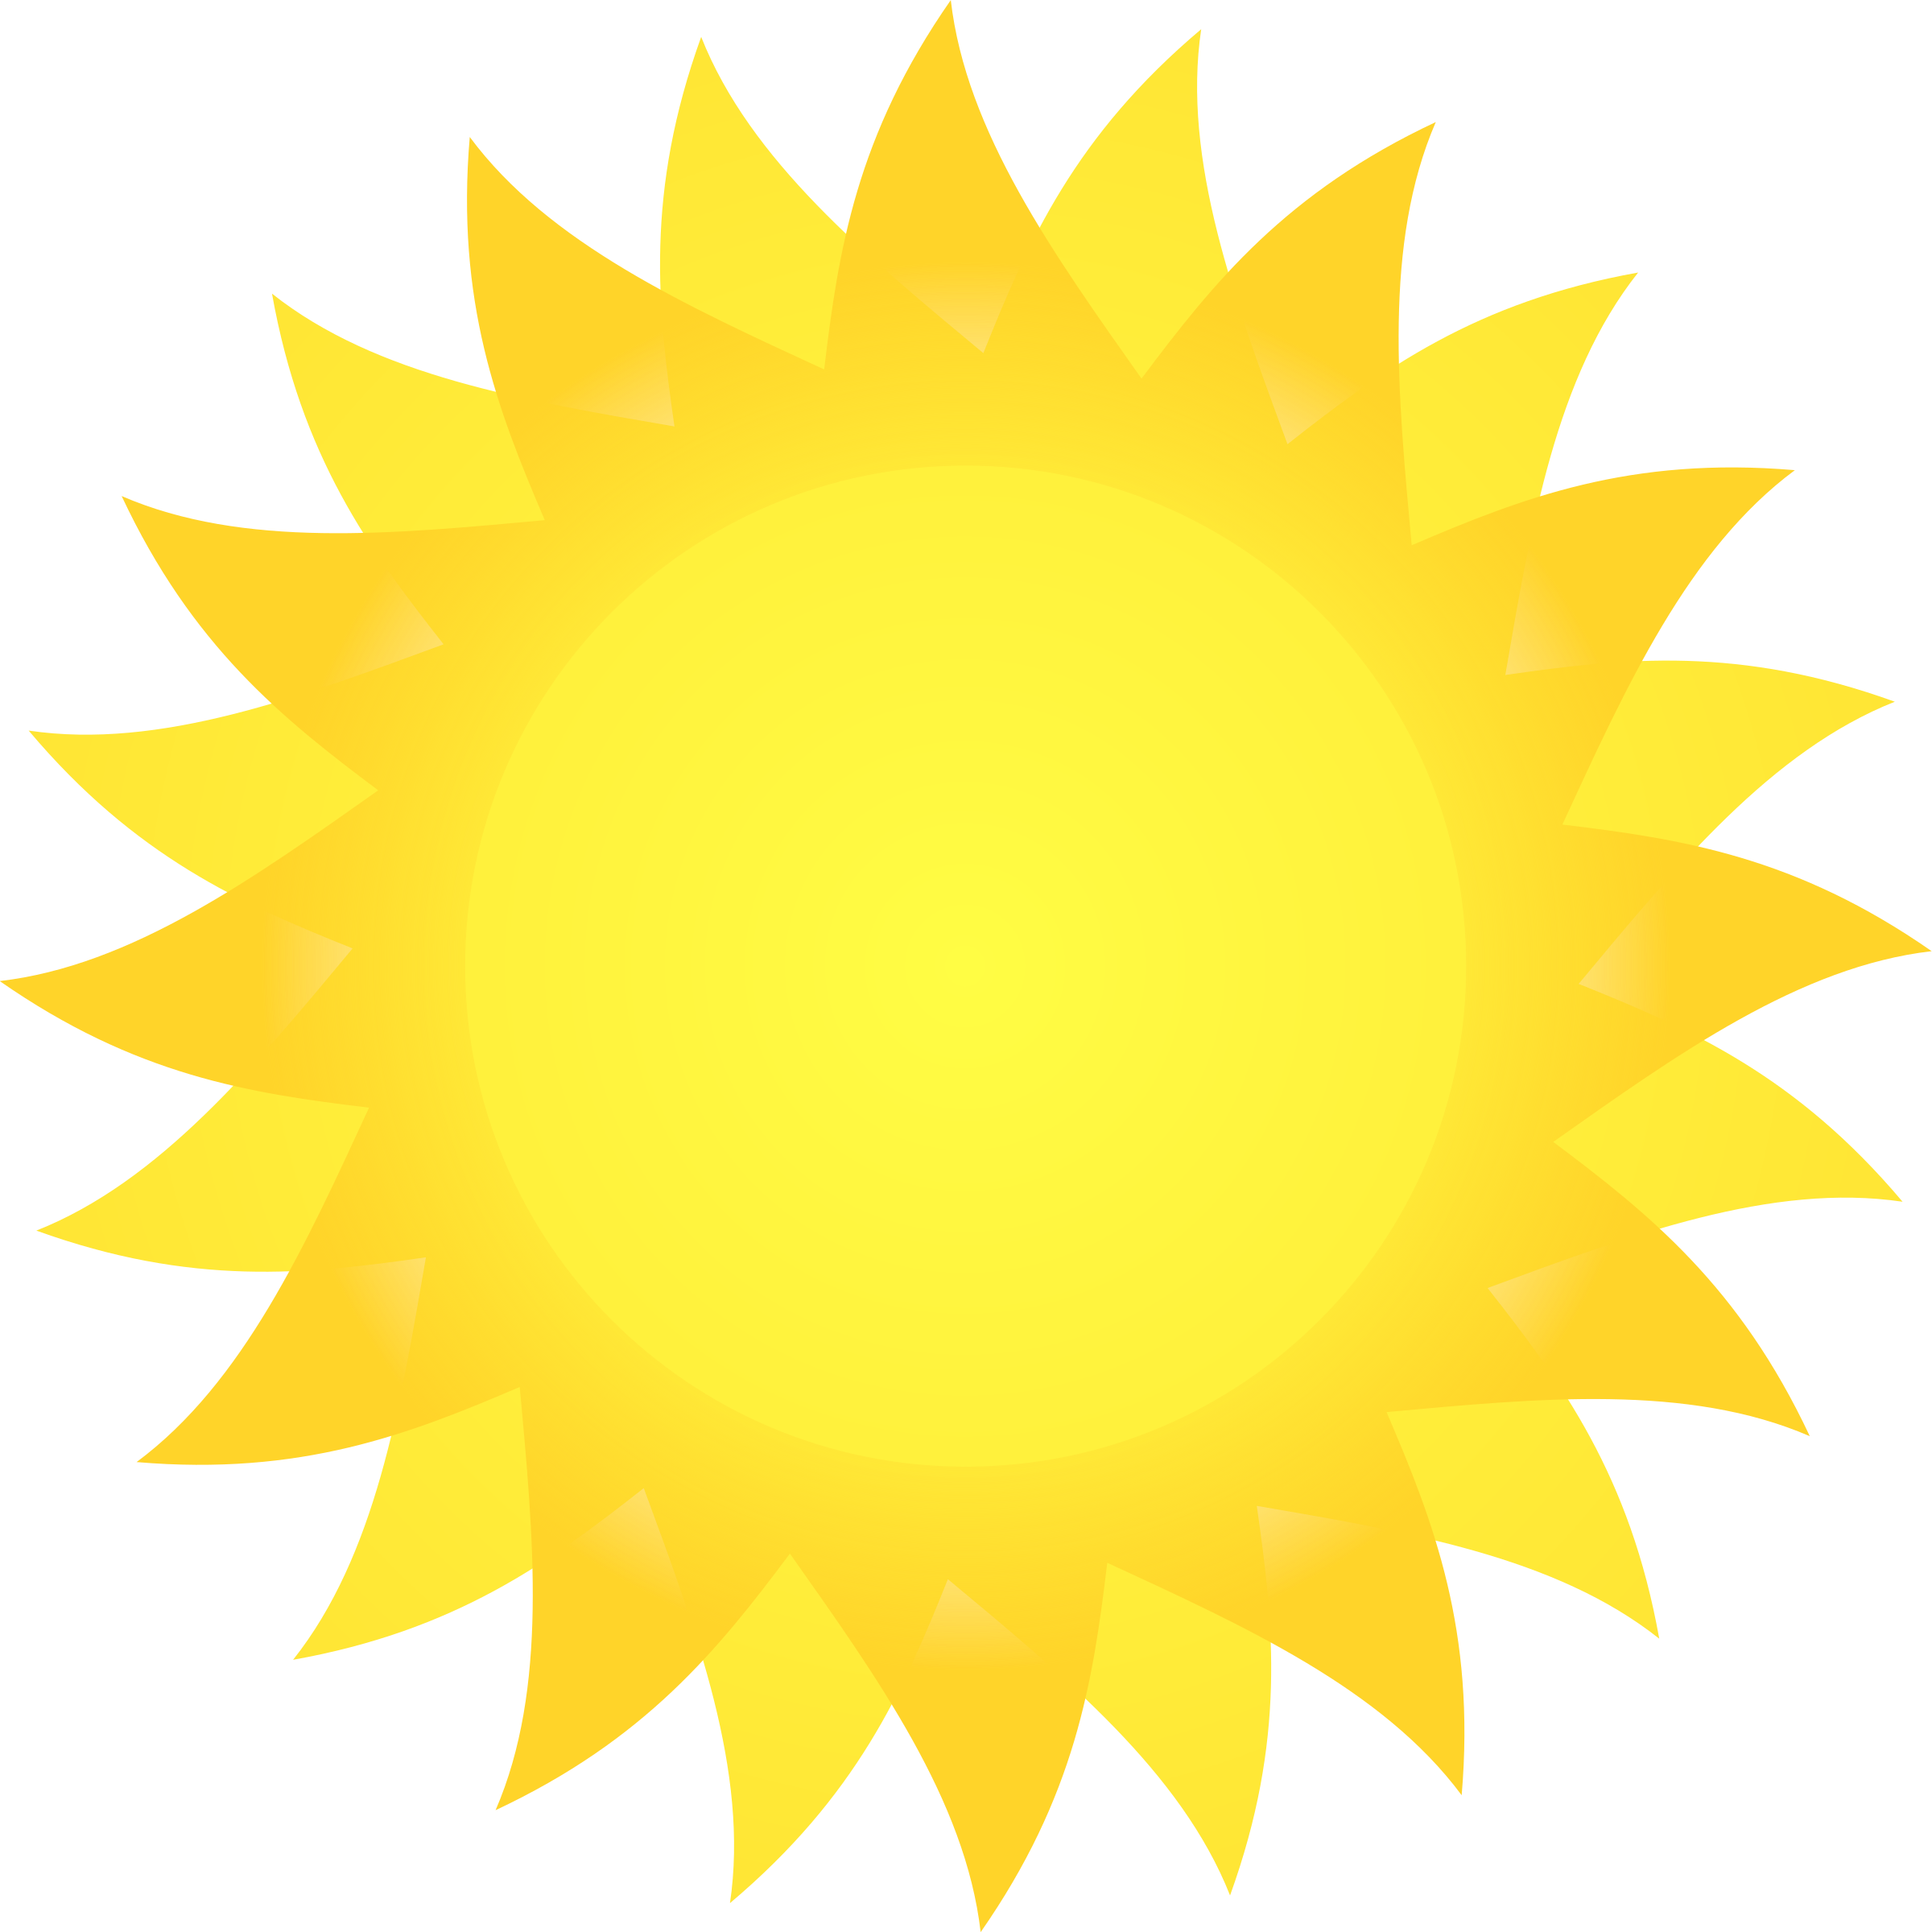 Sunshine Clipart Noon Sun - Cartoon Sun With Black Background - (2400x2400)  Png Clipart Download